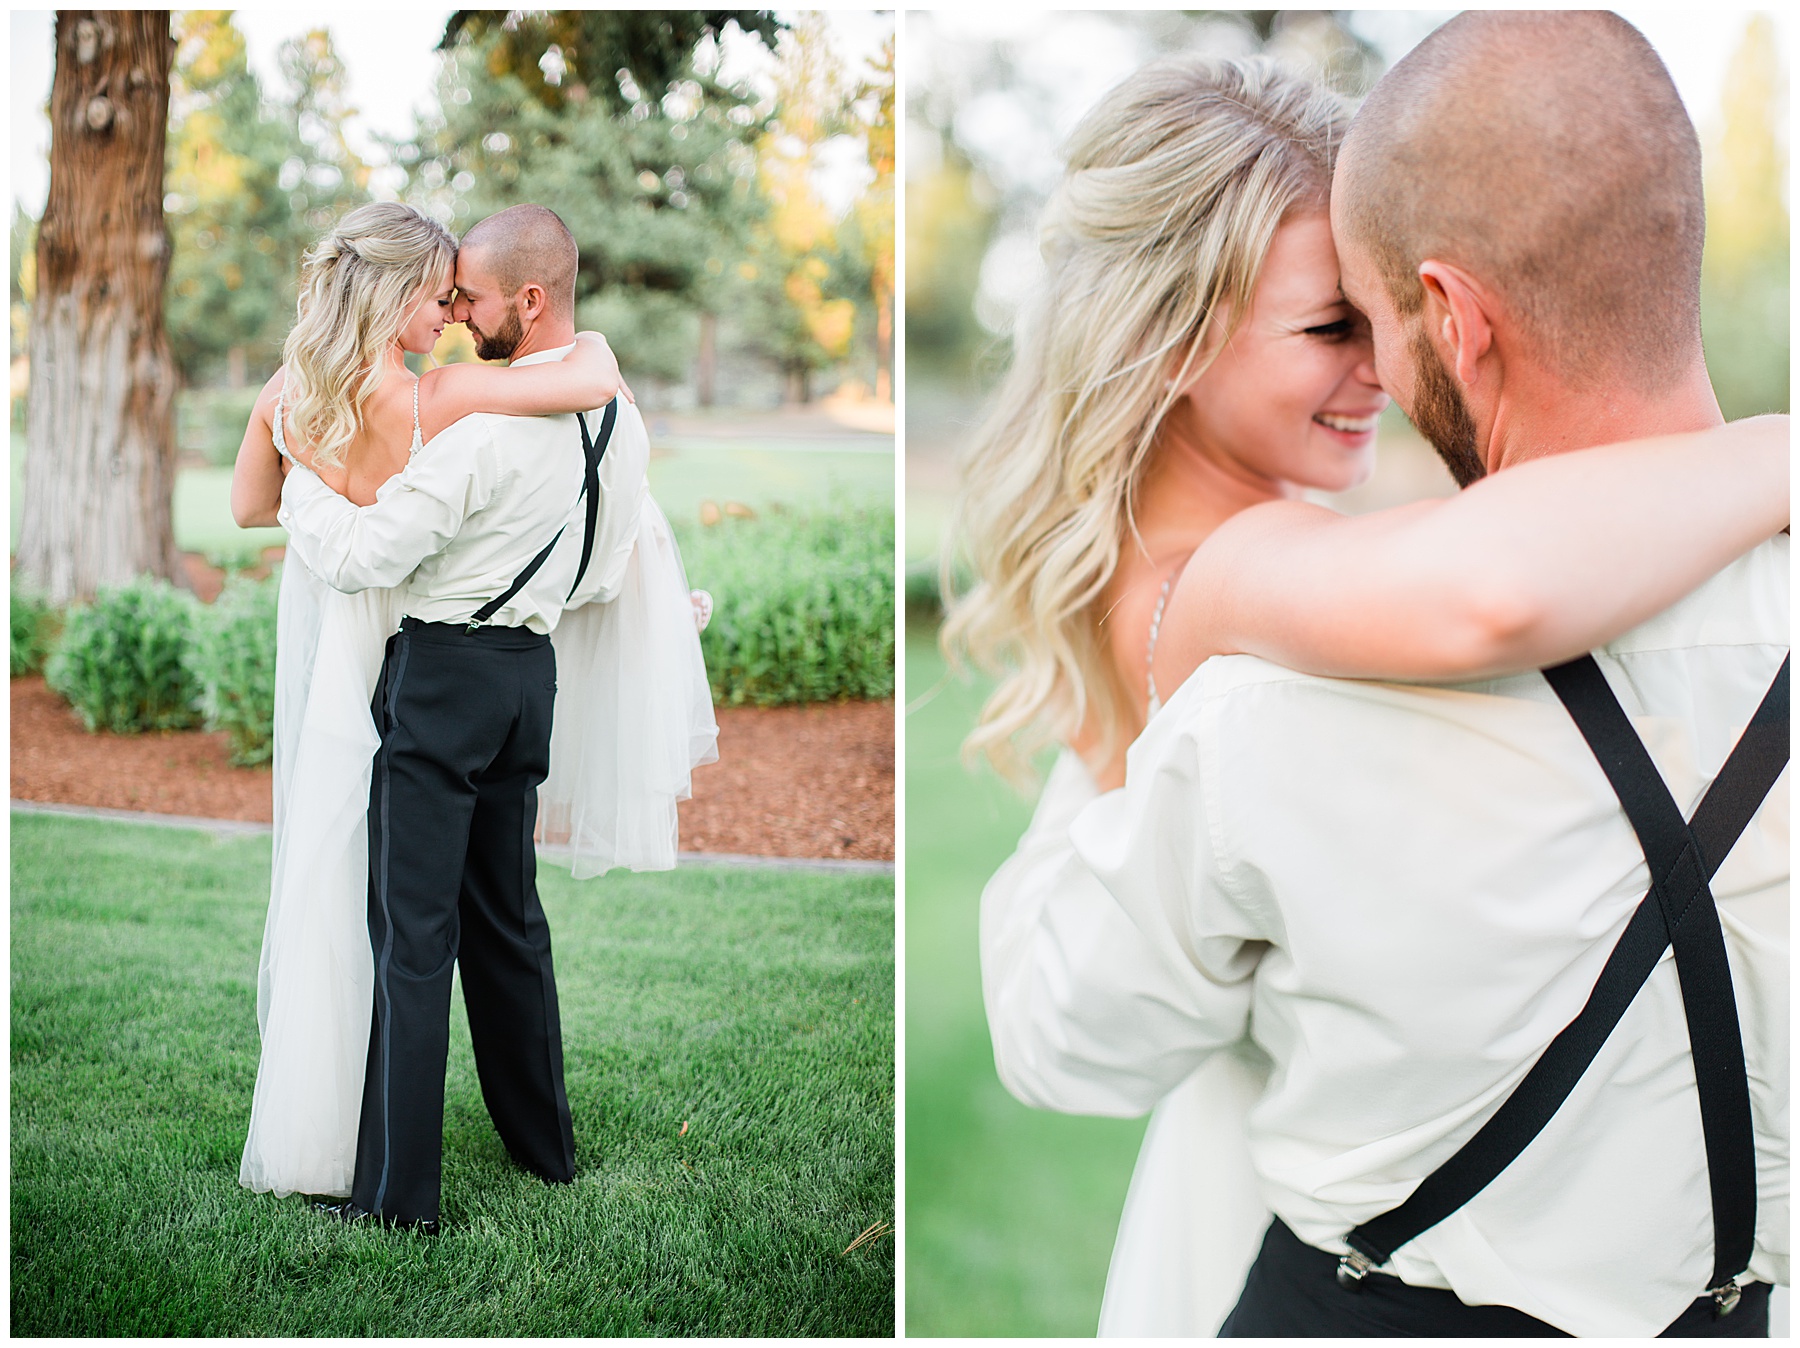 Portrait of bride and groom at their Bend Oregon Intimate Backyard Wedding